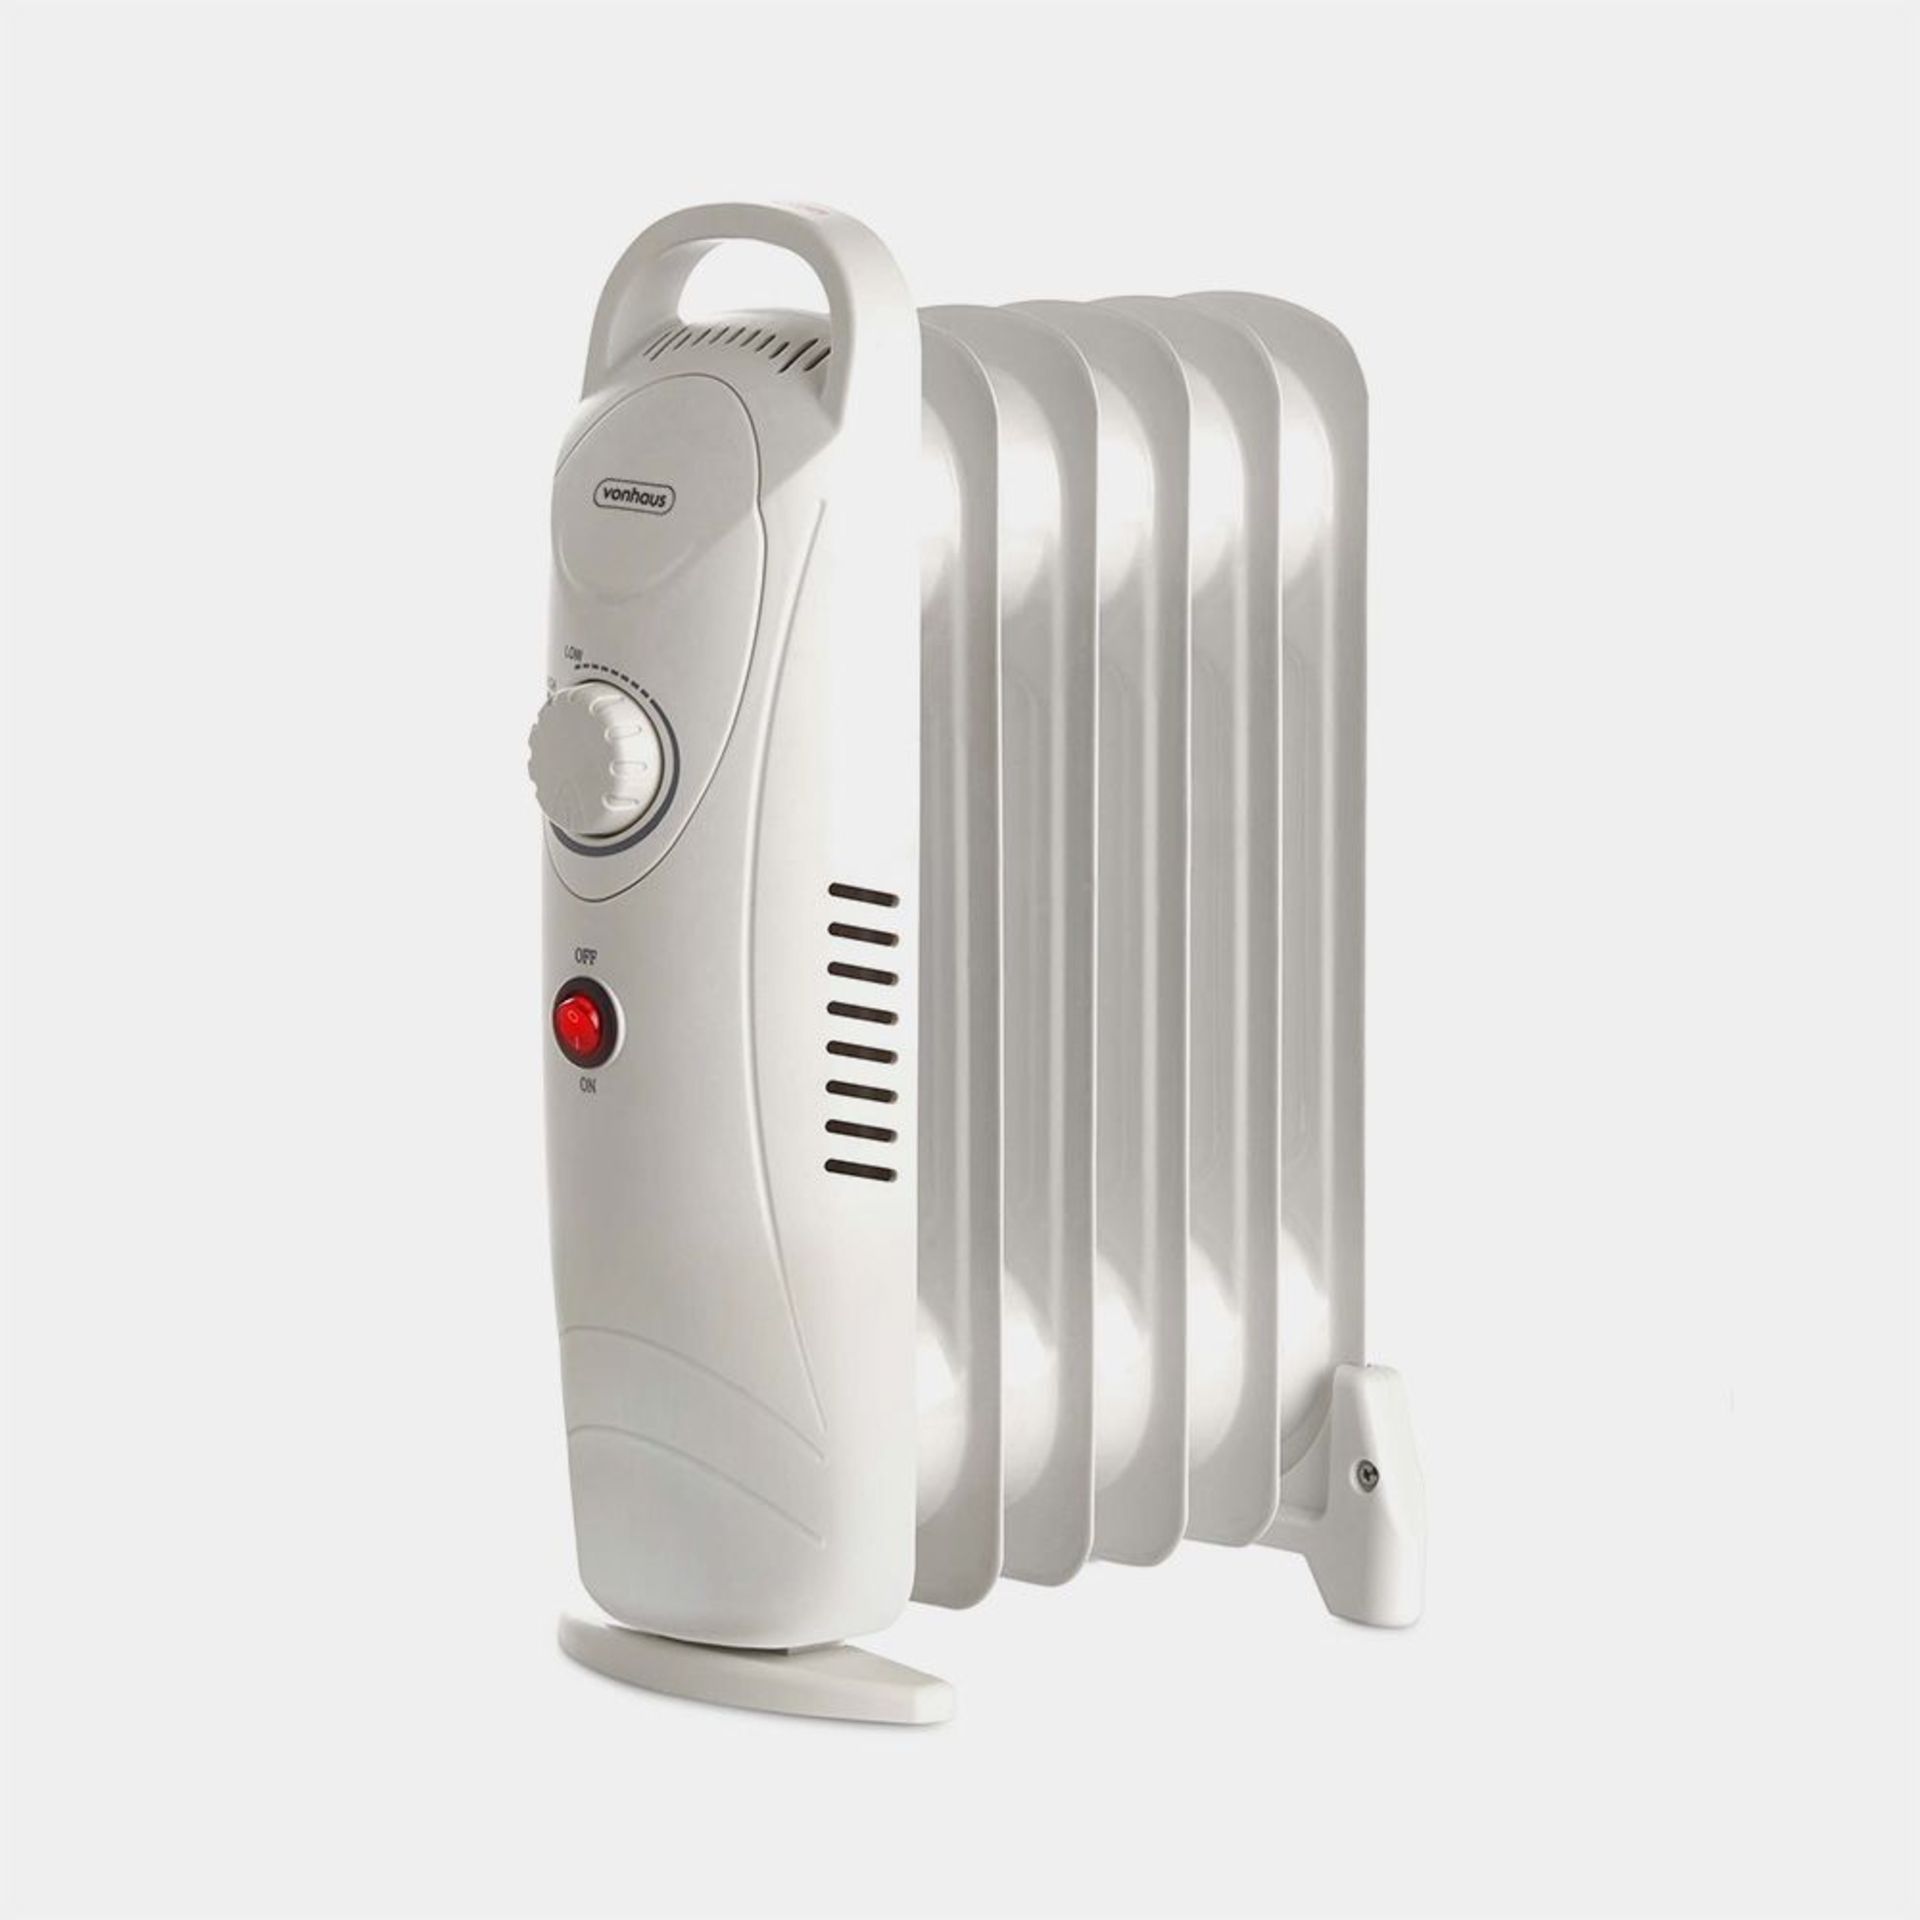 6 Fin 800W Oil Filled Radiator - White. - P6. Equipped with 6 sizeable oil-filled radiant fins to